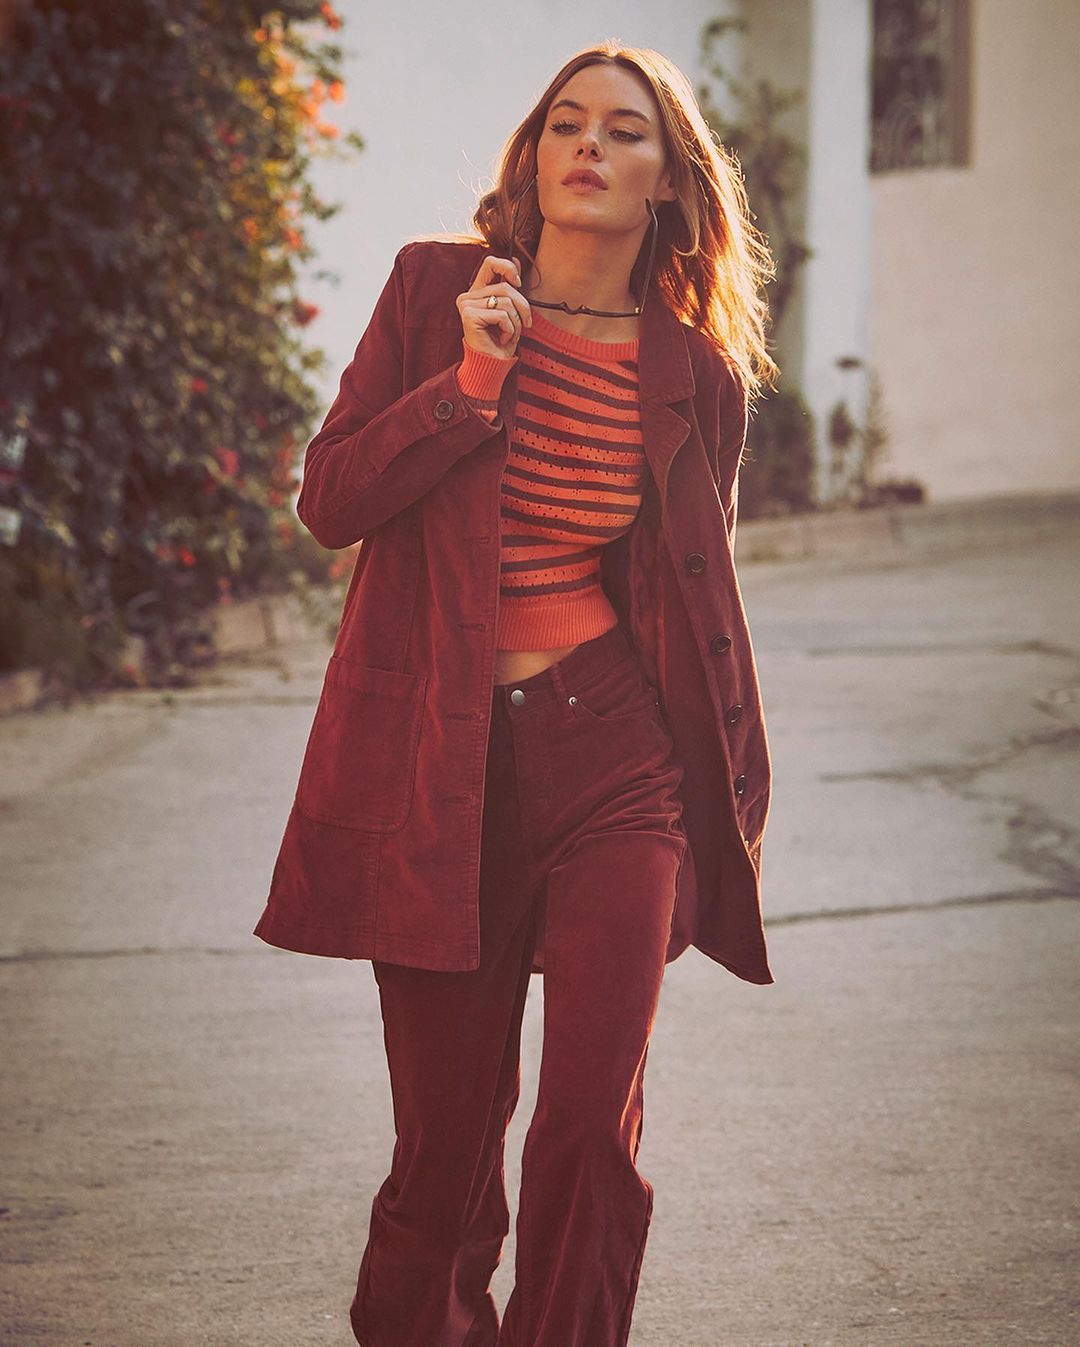 Camille rowe 6 hottest pics, camille rowe 6 instagram